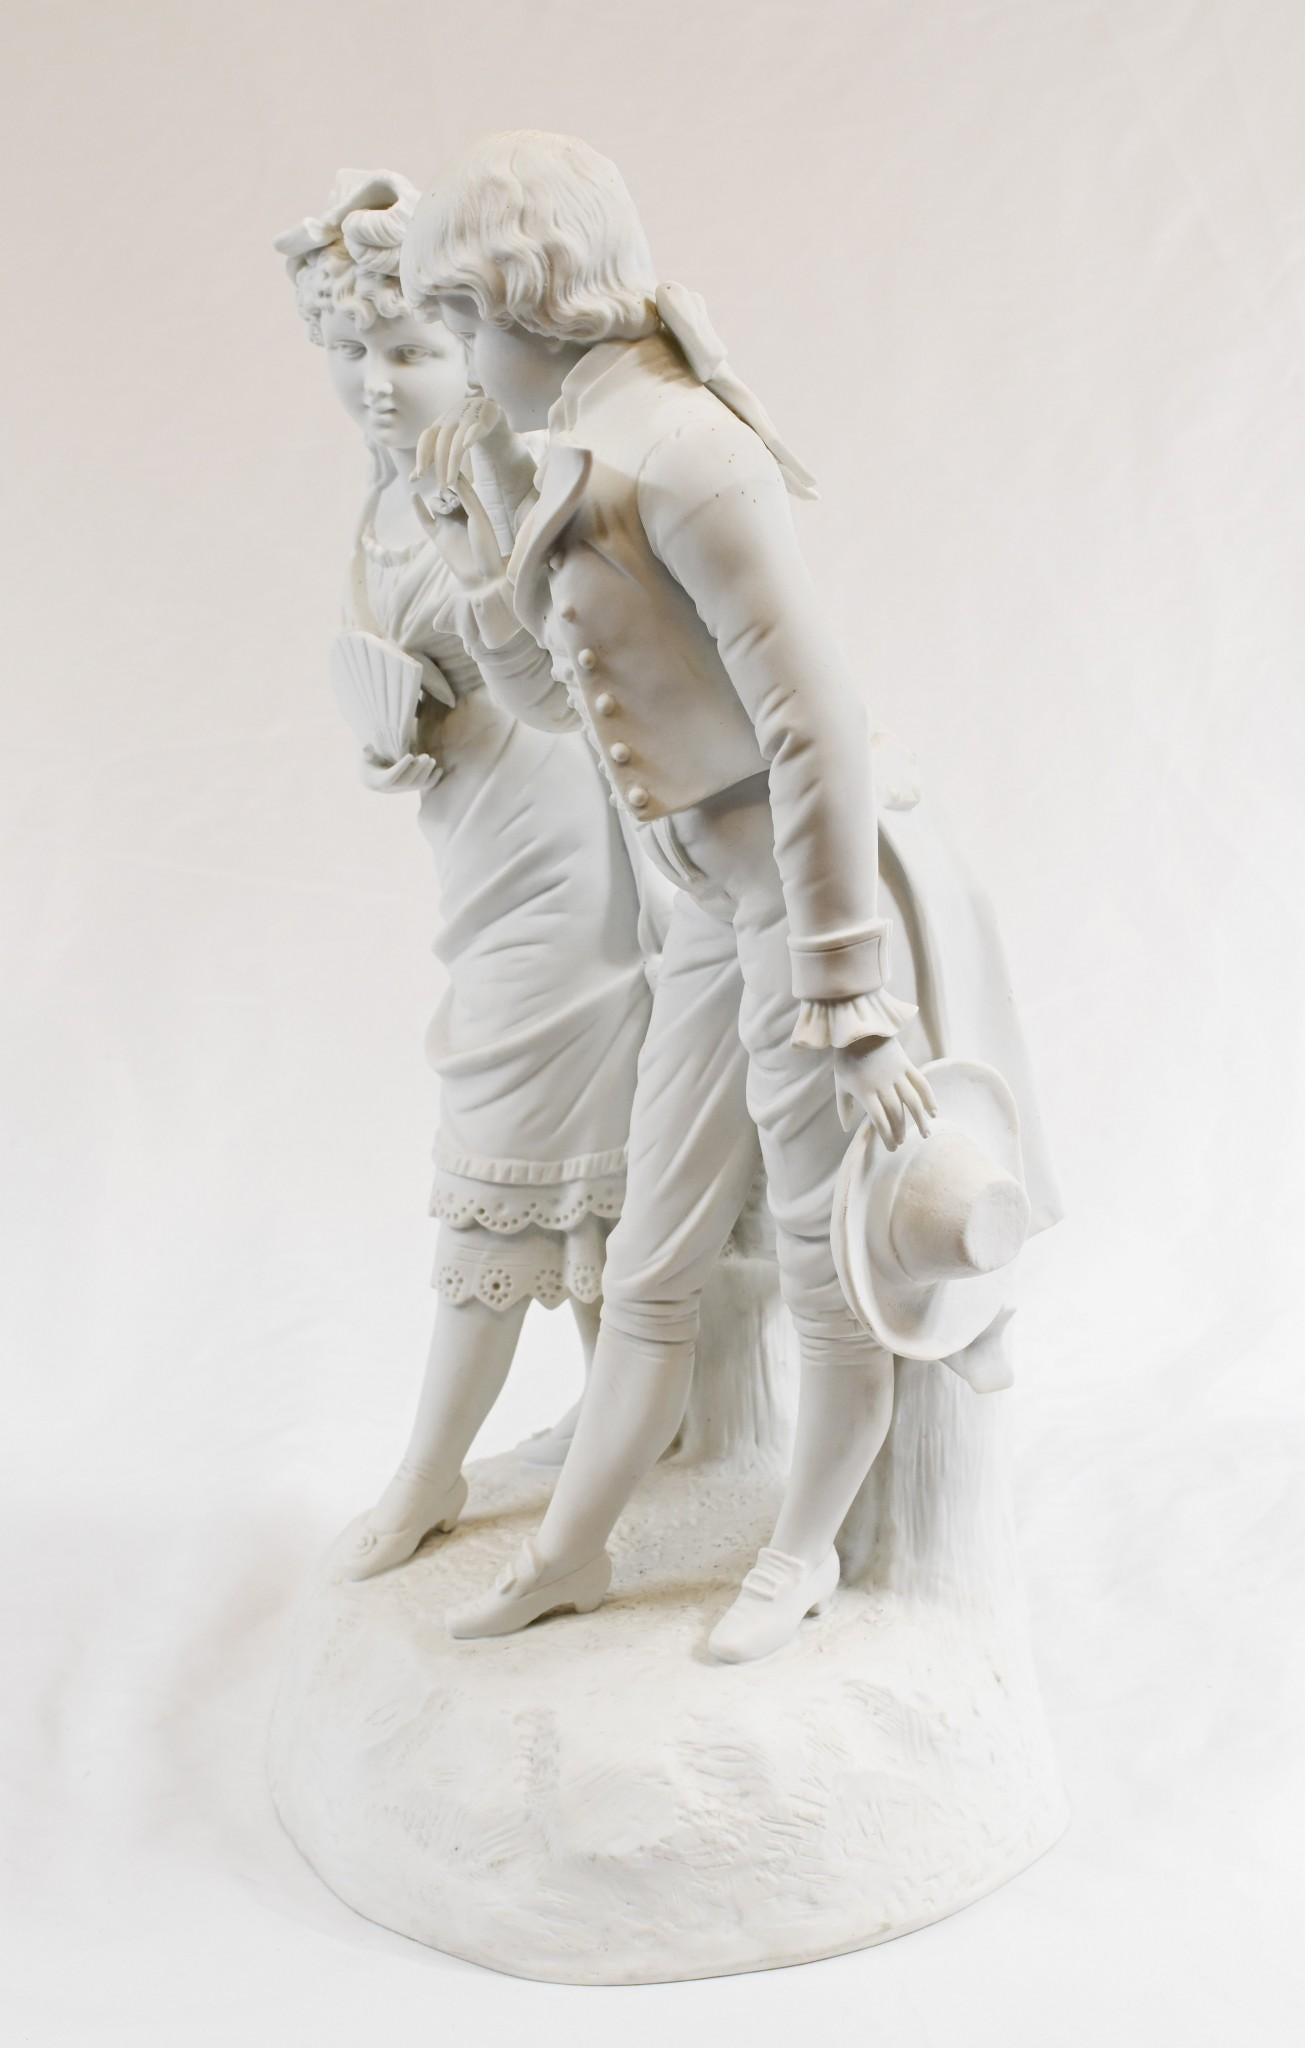 A French pair of young lovers dressed in 18th century clothing in porcelain biscuit ware by Copeland
Highly collectable statue just under two feet tall
Parian is made of biscuit porcelain. With its white color, the material makes an attractive